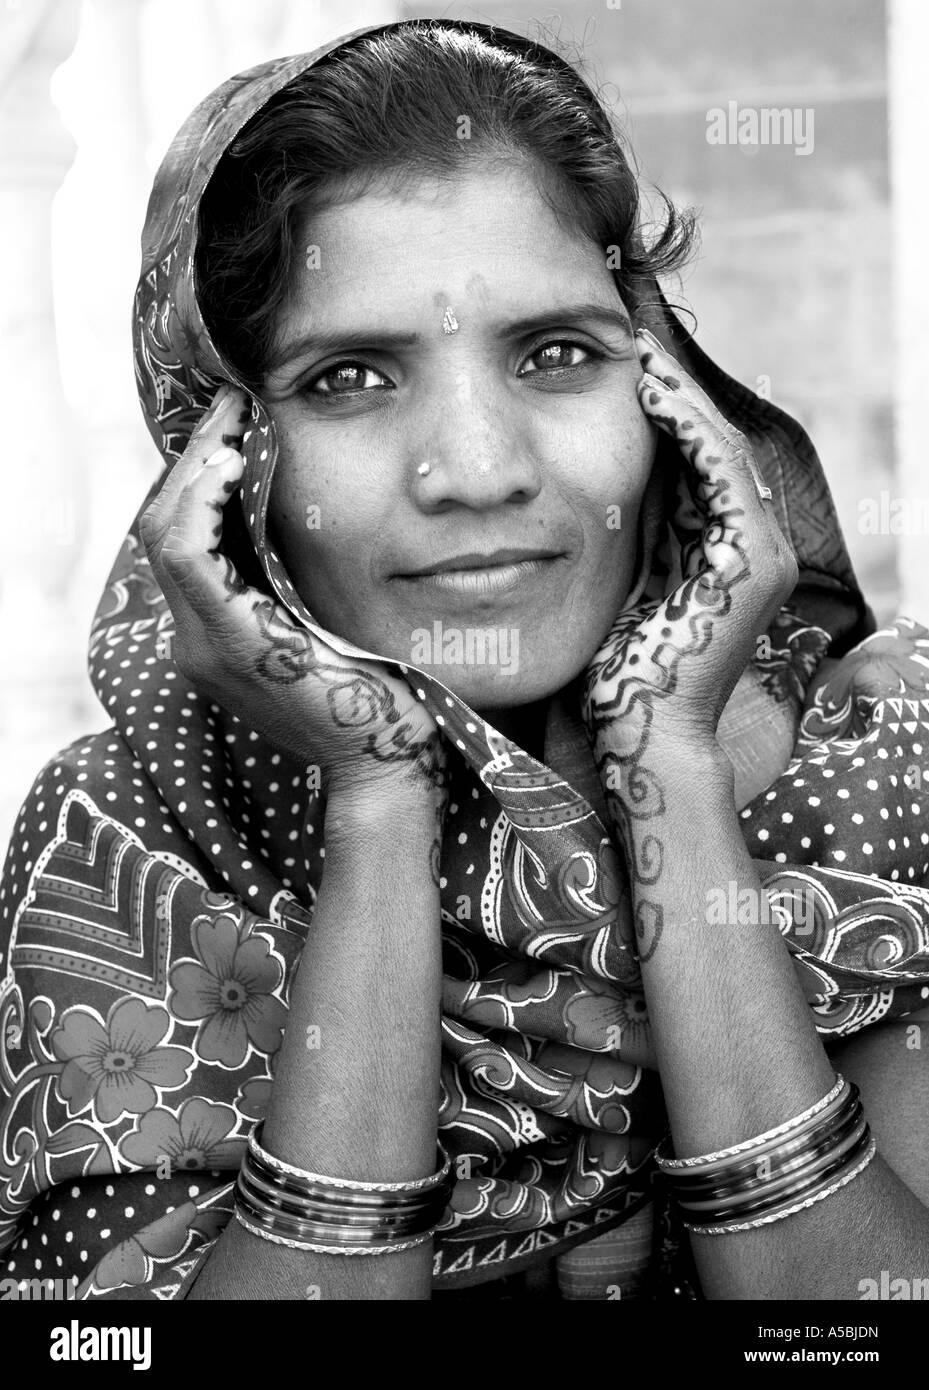 Henna woman Black and White Stock Photos & Images - Alamy